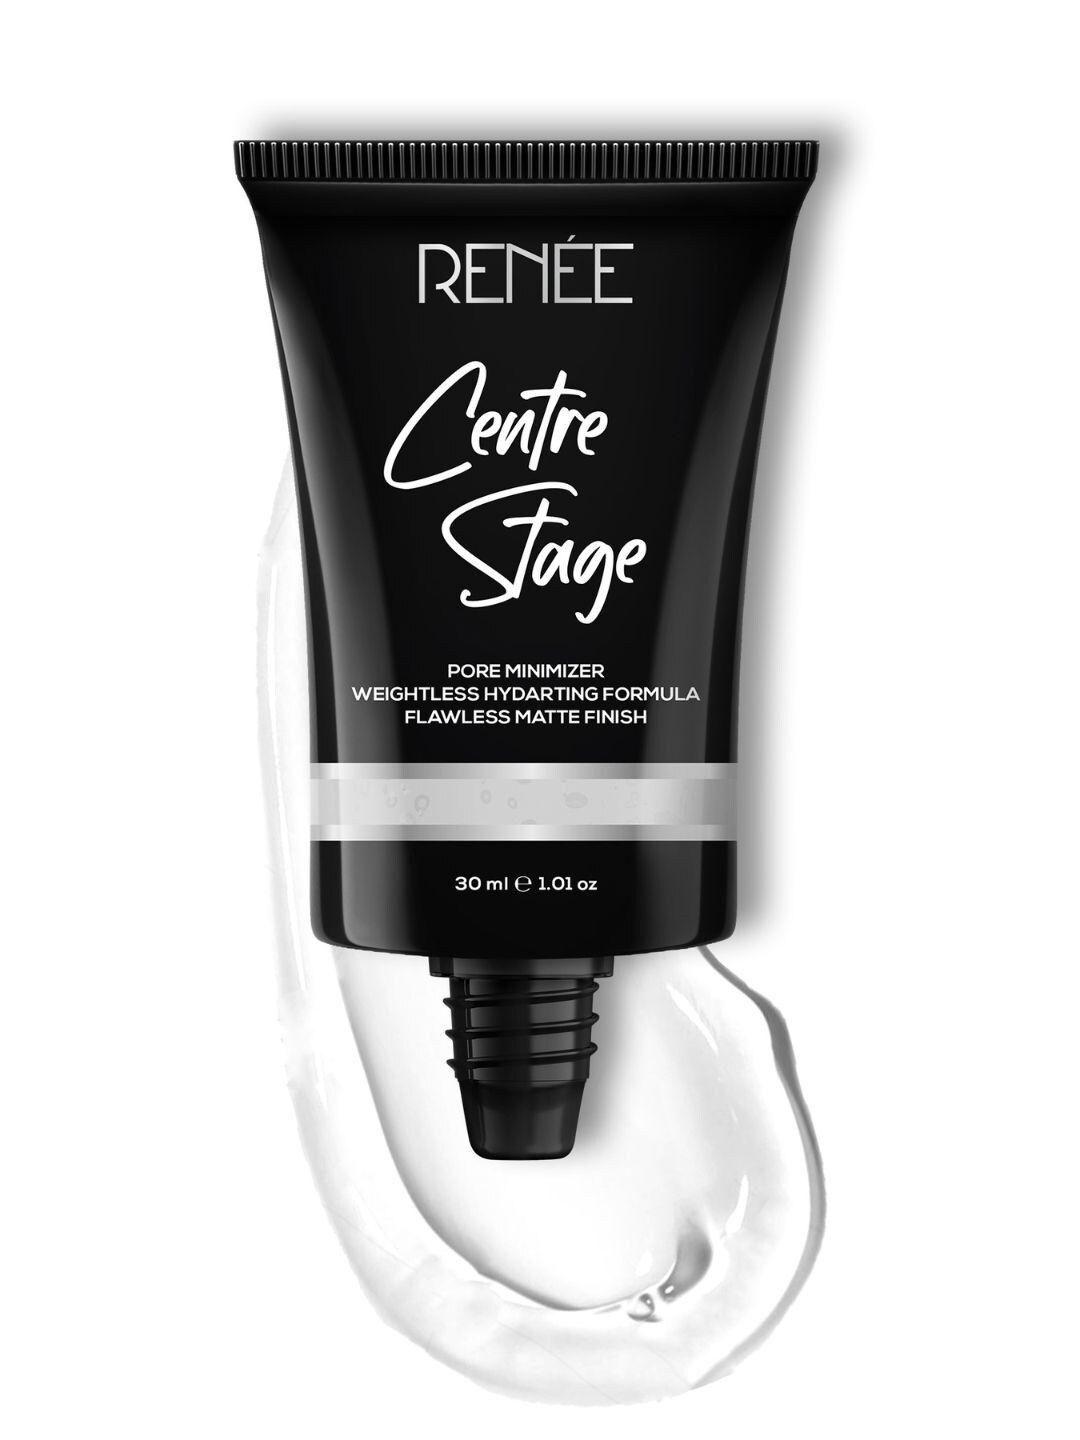 renee-centre-stage-weightless-hydrating-flawless-matte-pore-minimizer-primer---30ml